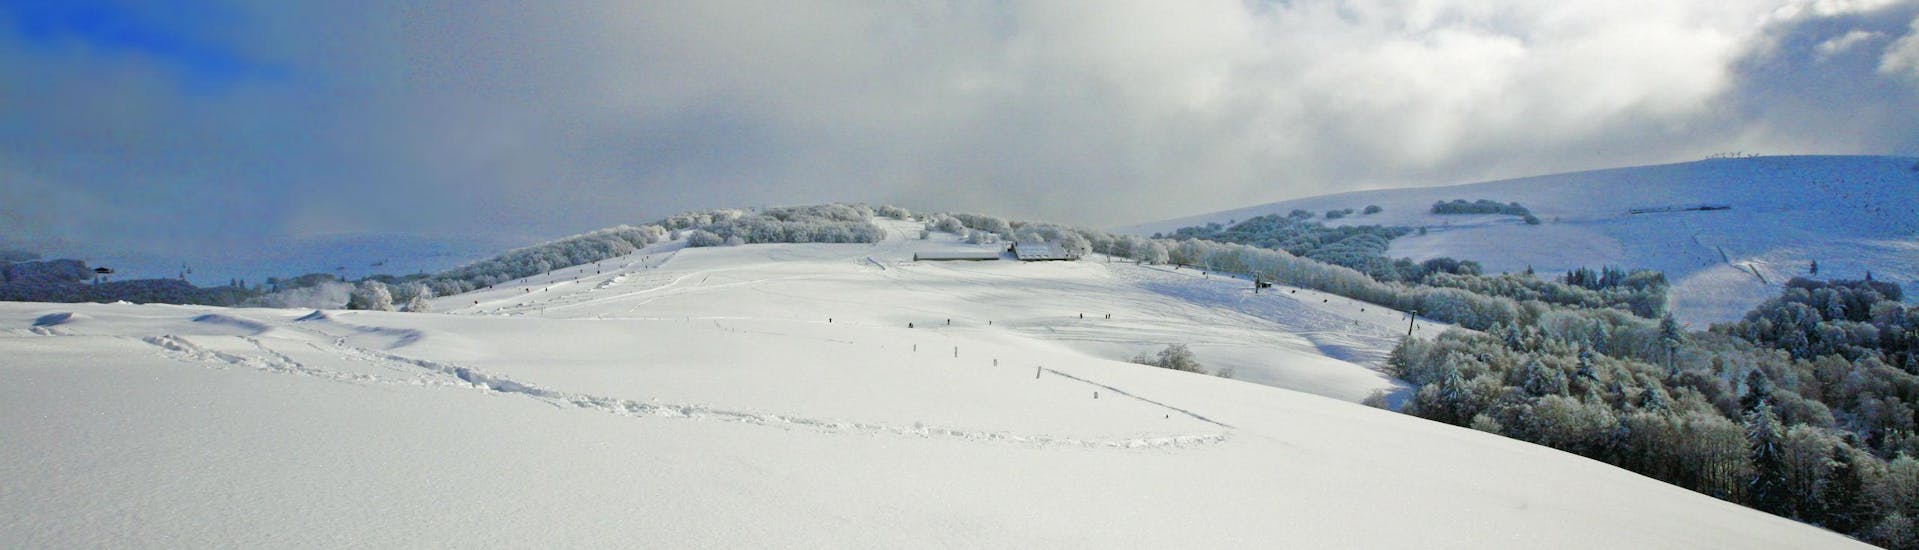 An image of the snow-covered hills in the French department of Vosges, where local ski schools offer a selection of ski lessons.